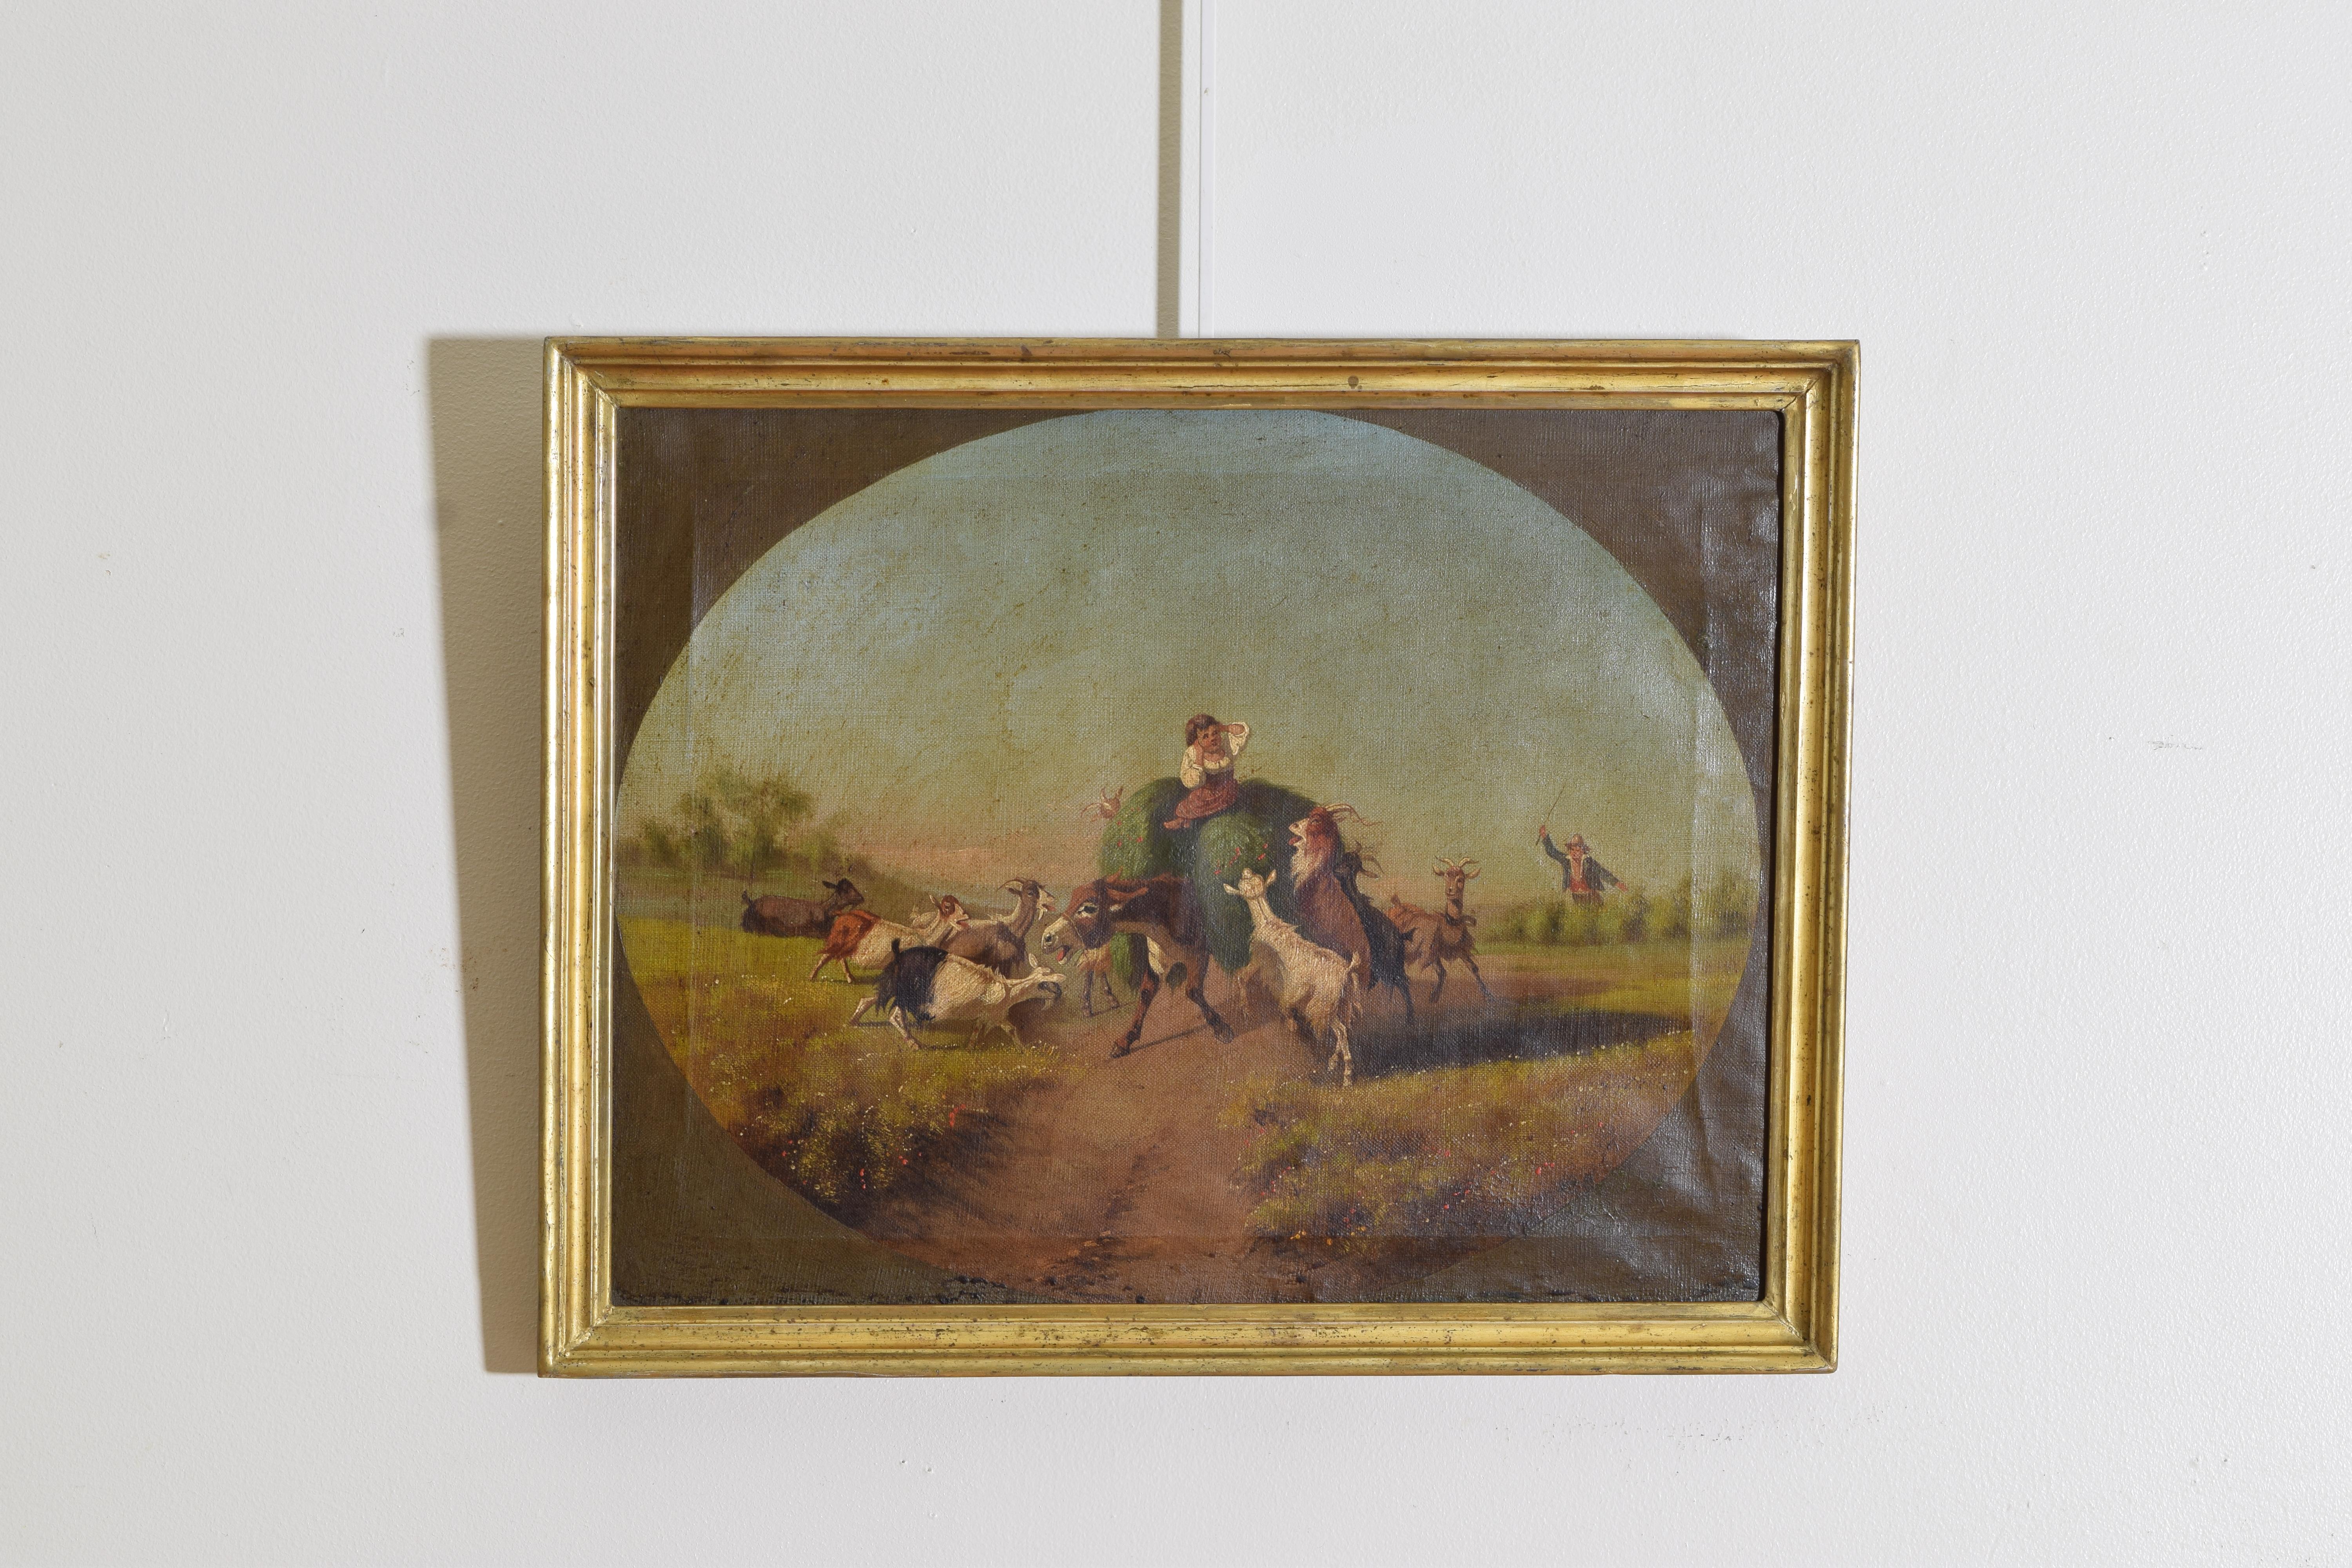 Painted on an oval ground within a rectangular canvas, the corners painted black, depicting a woman atop a haycart being wildly pulled by a donkey being harassed by a gang of unruly goats with a farmer giving chase, if you want action you got